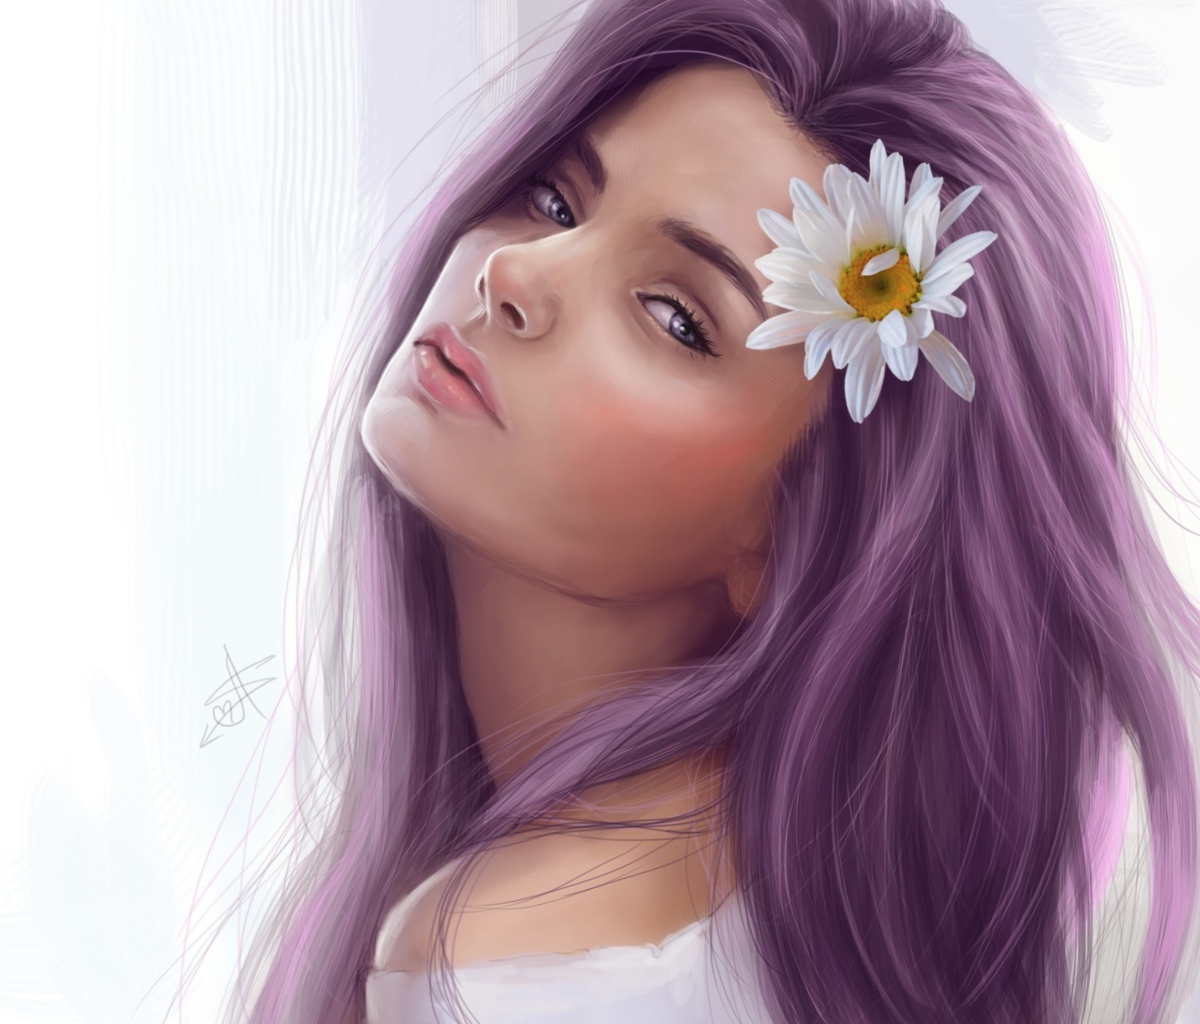 Girl With Purple Hair Painting wallpaper 1200x1024